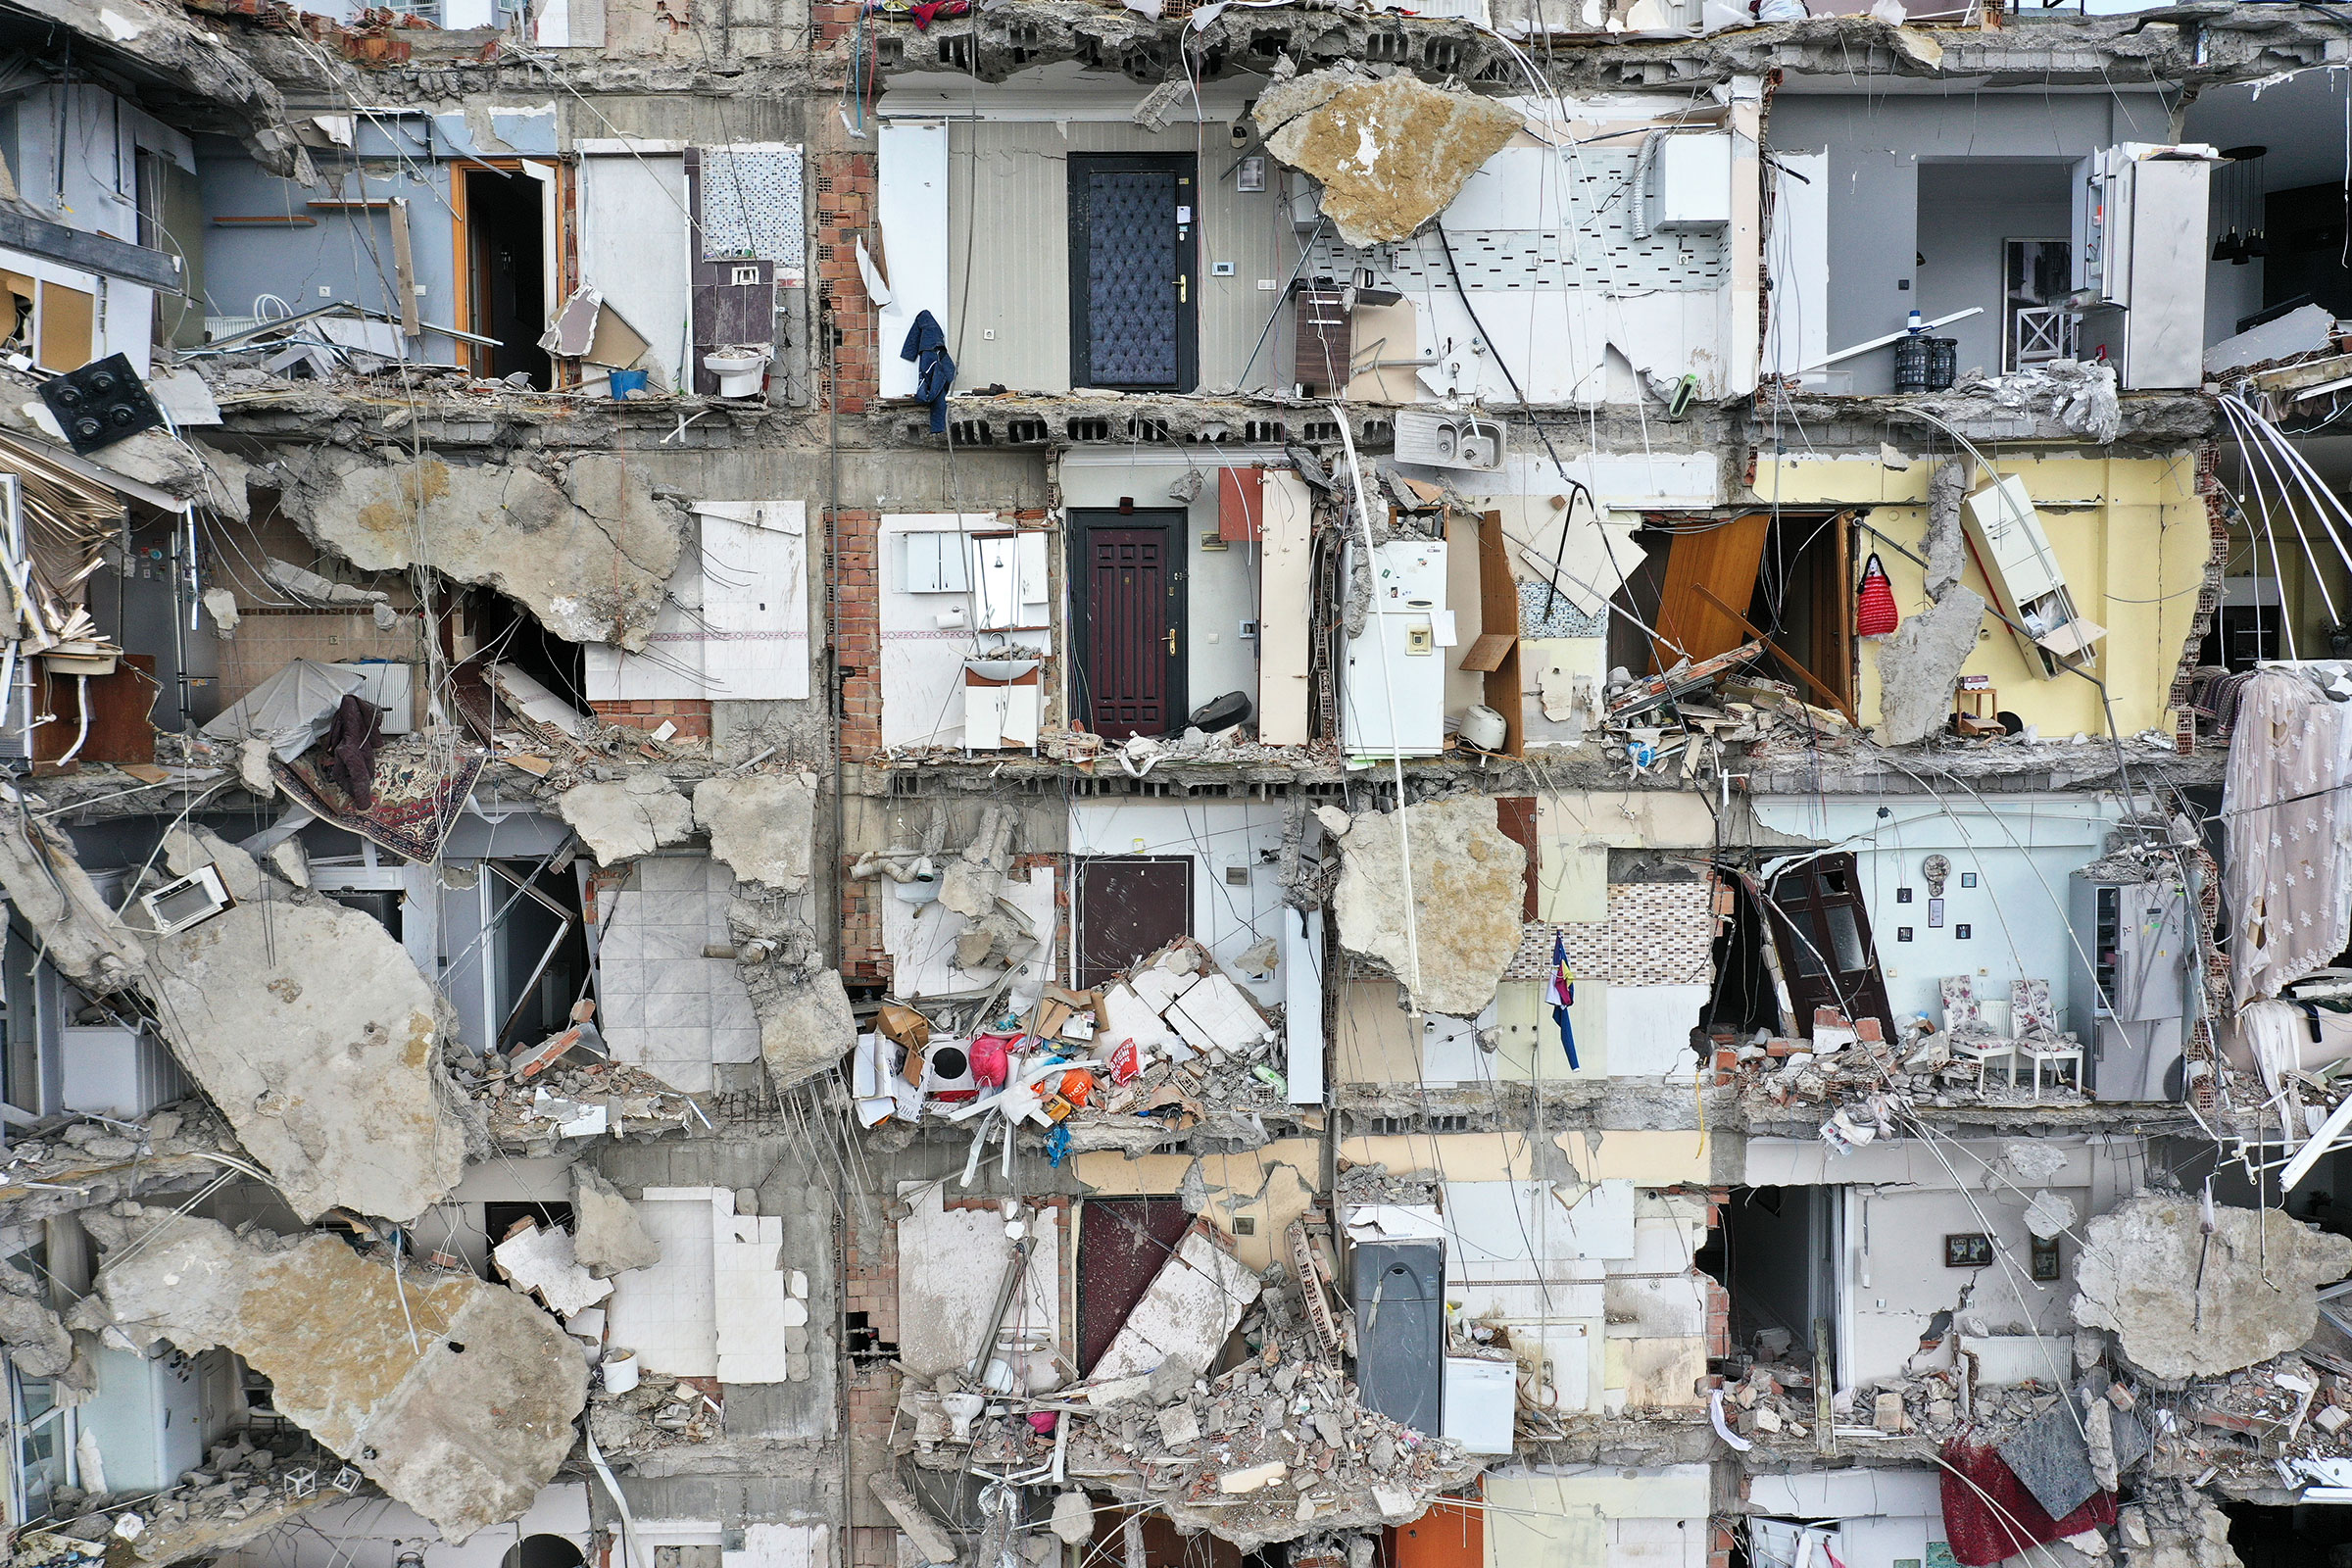 An aerial view of a damaged building after an earthquake in Adana, Turkey, on Feb. 06, 2023. (Oguz Yeter—Anadolu Agency/Getty Images)